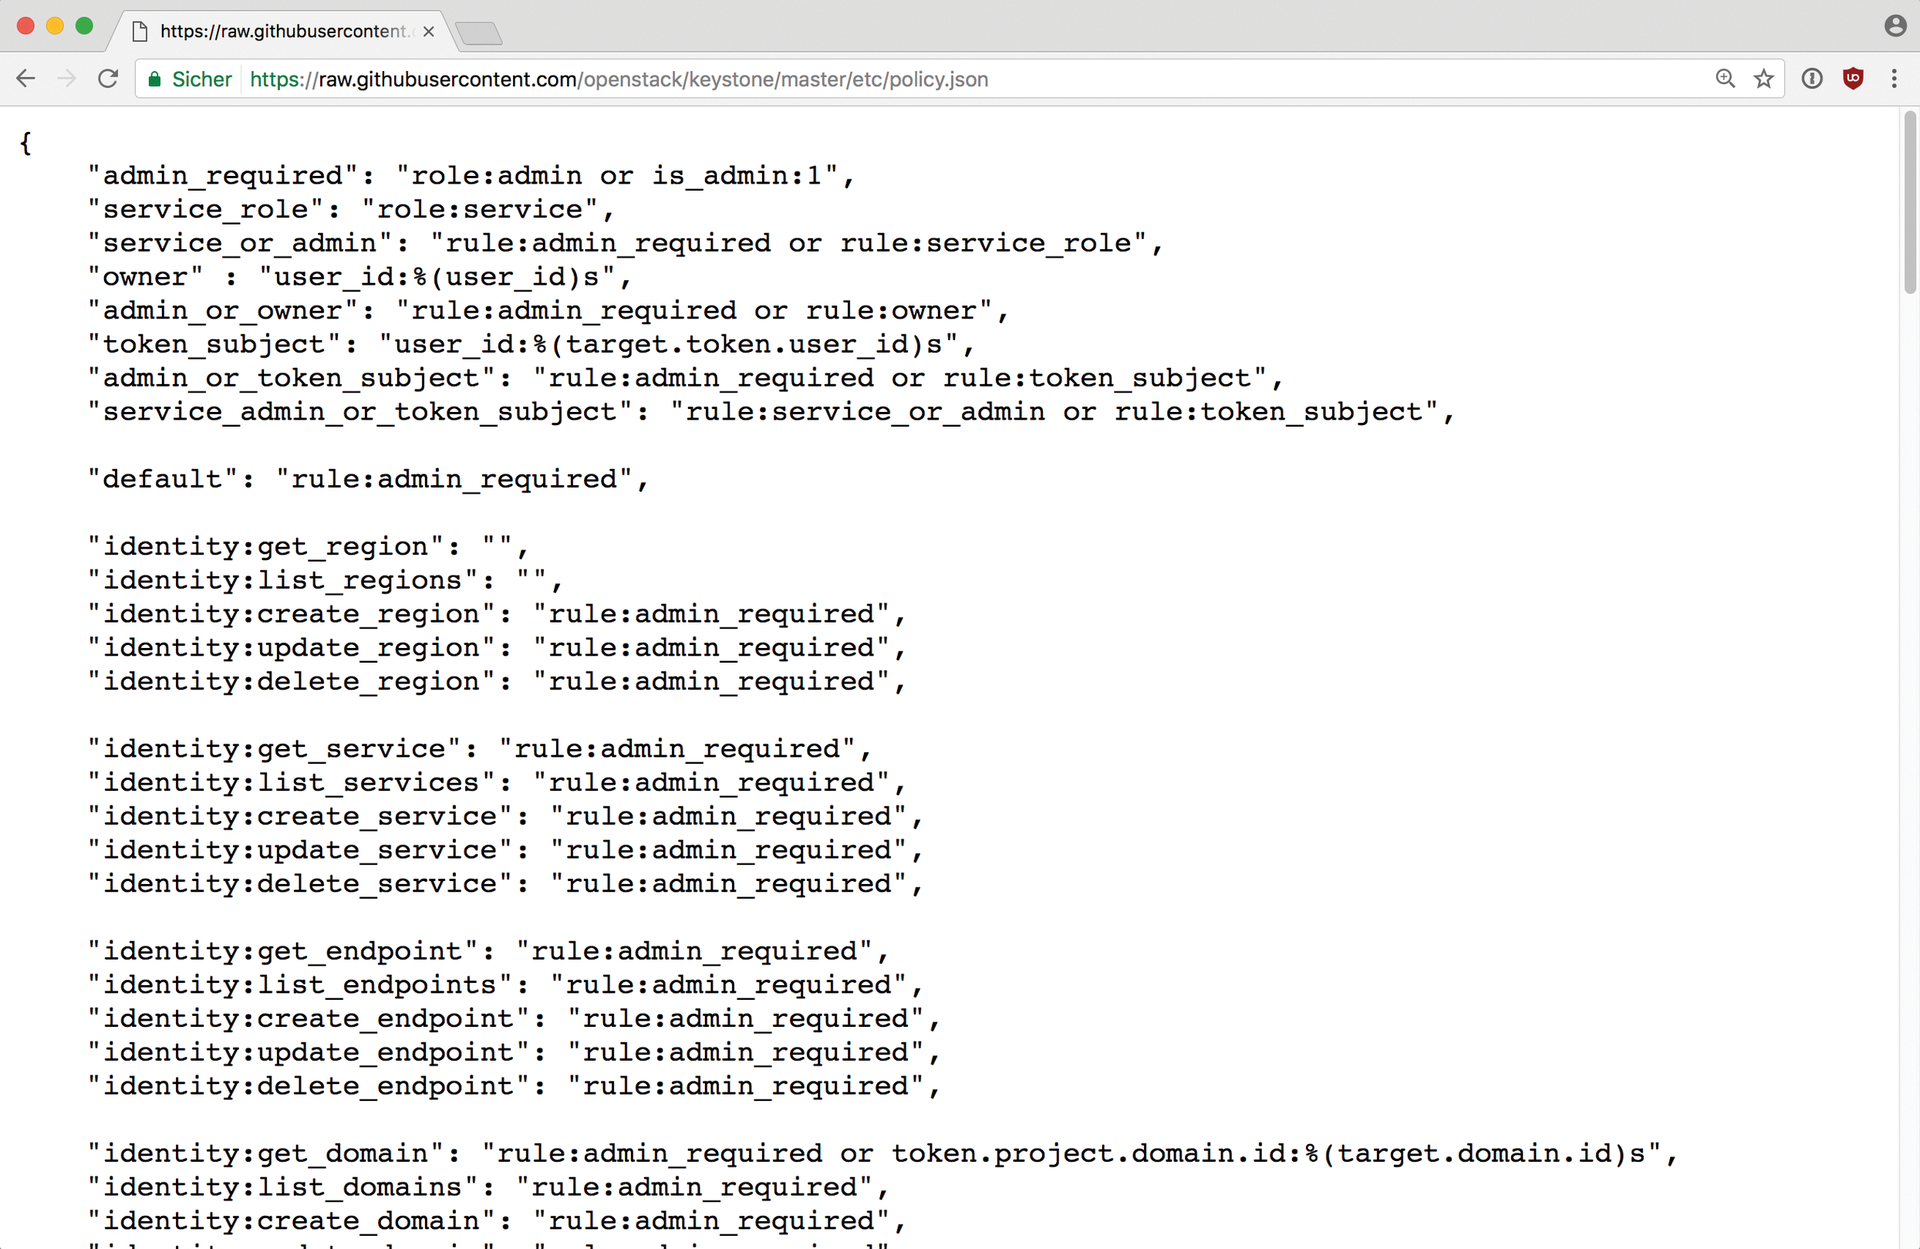 policy.json files control how the OpenStack services access individual APIs. 